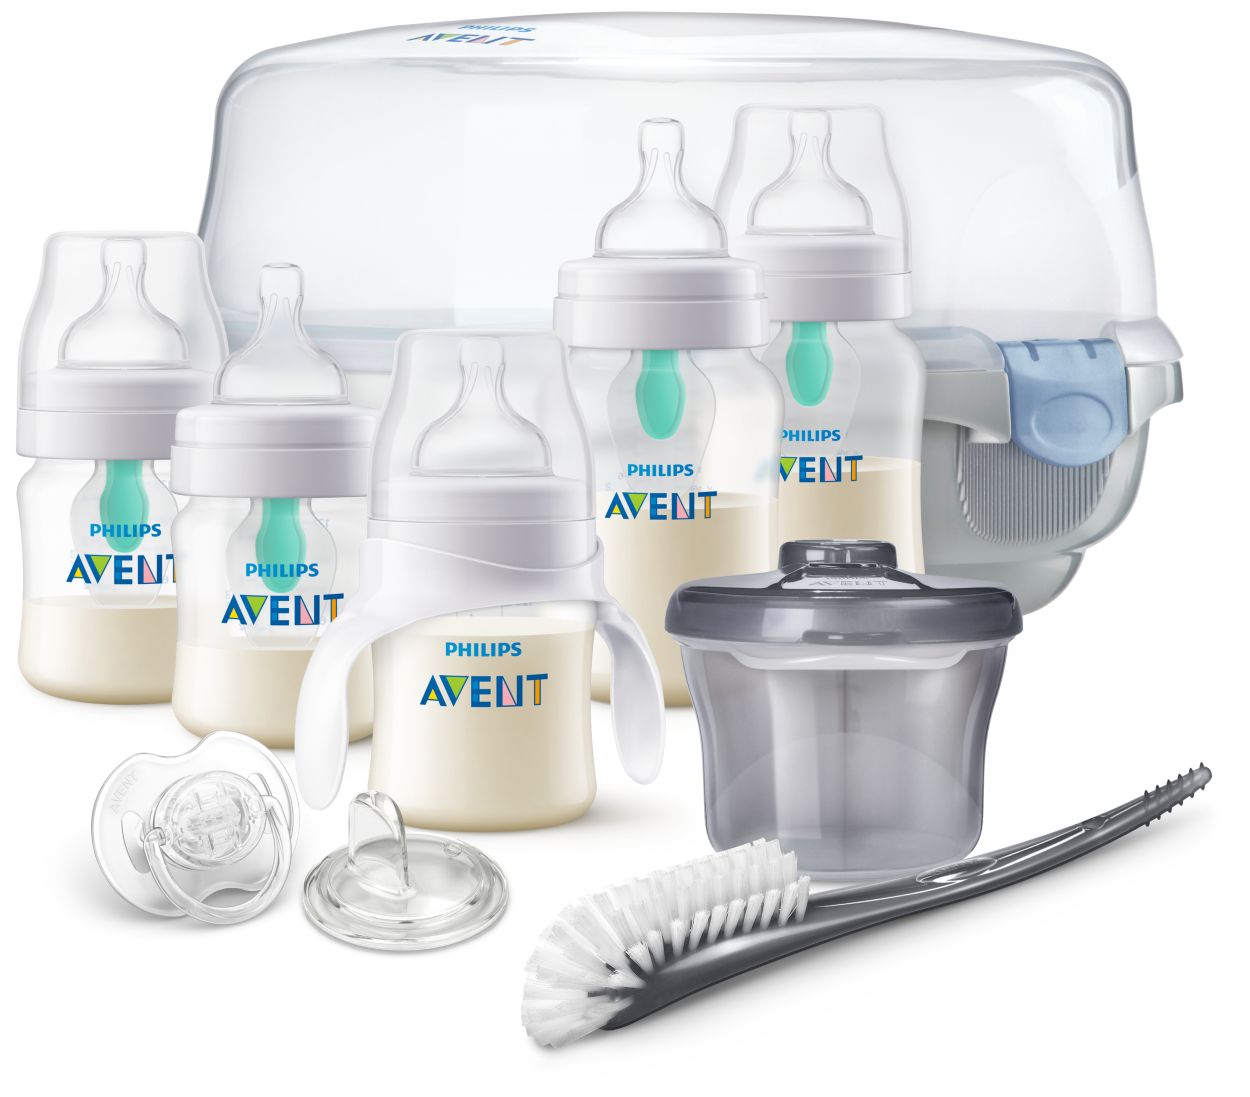 Philips Avent Anti-colic Baby Bottle With Airfree Vent Essentials Gift Set  - 19pc : Target